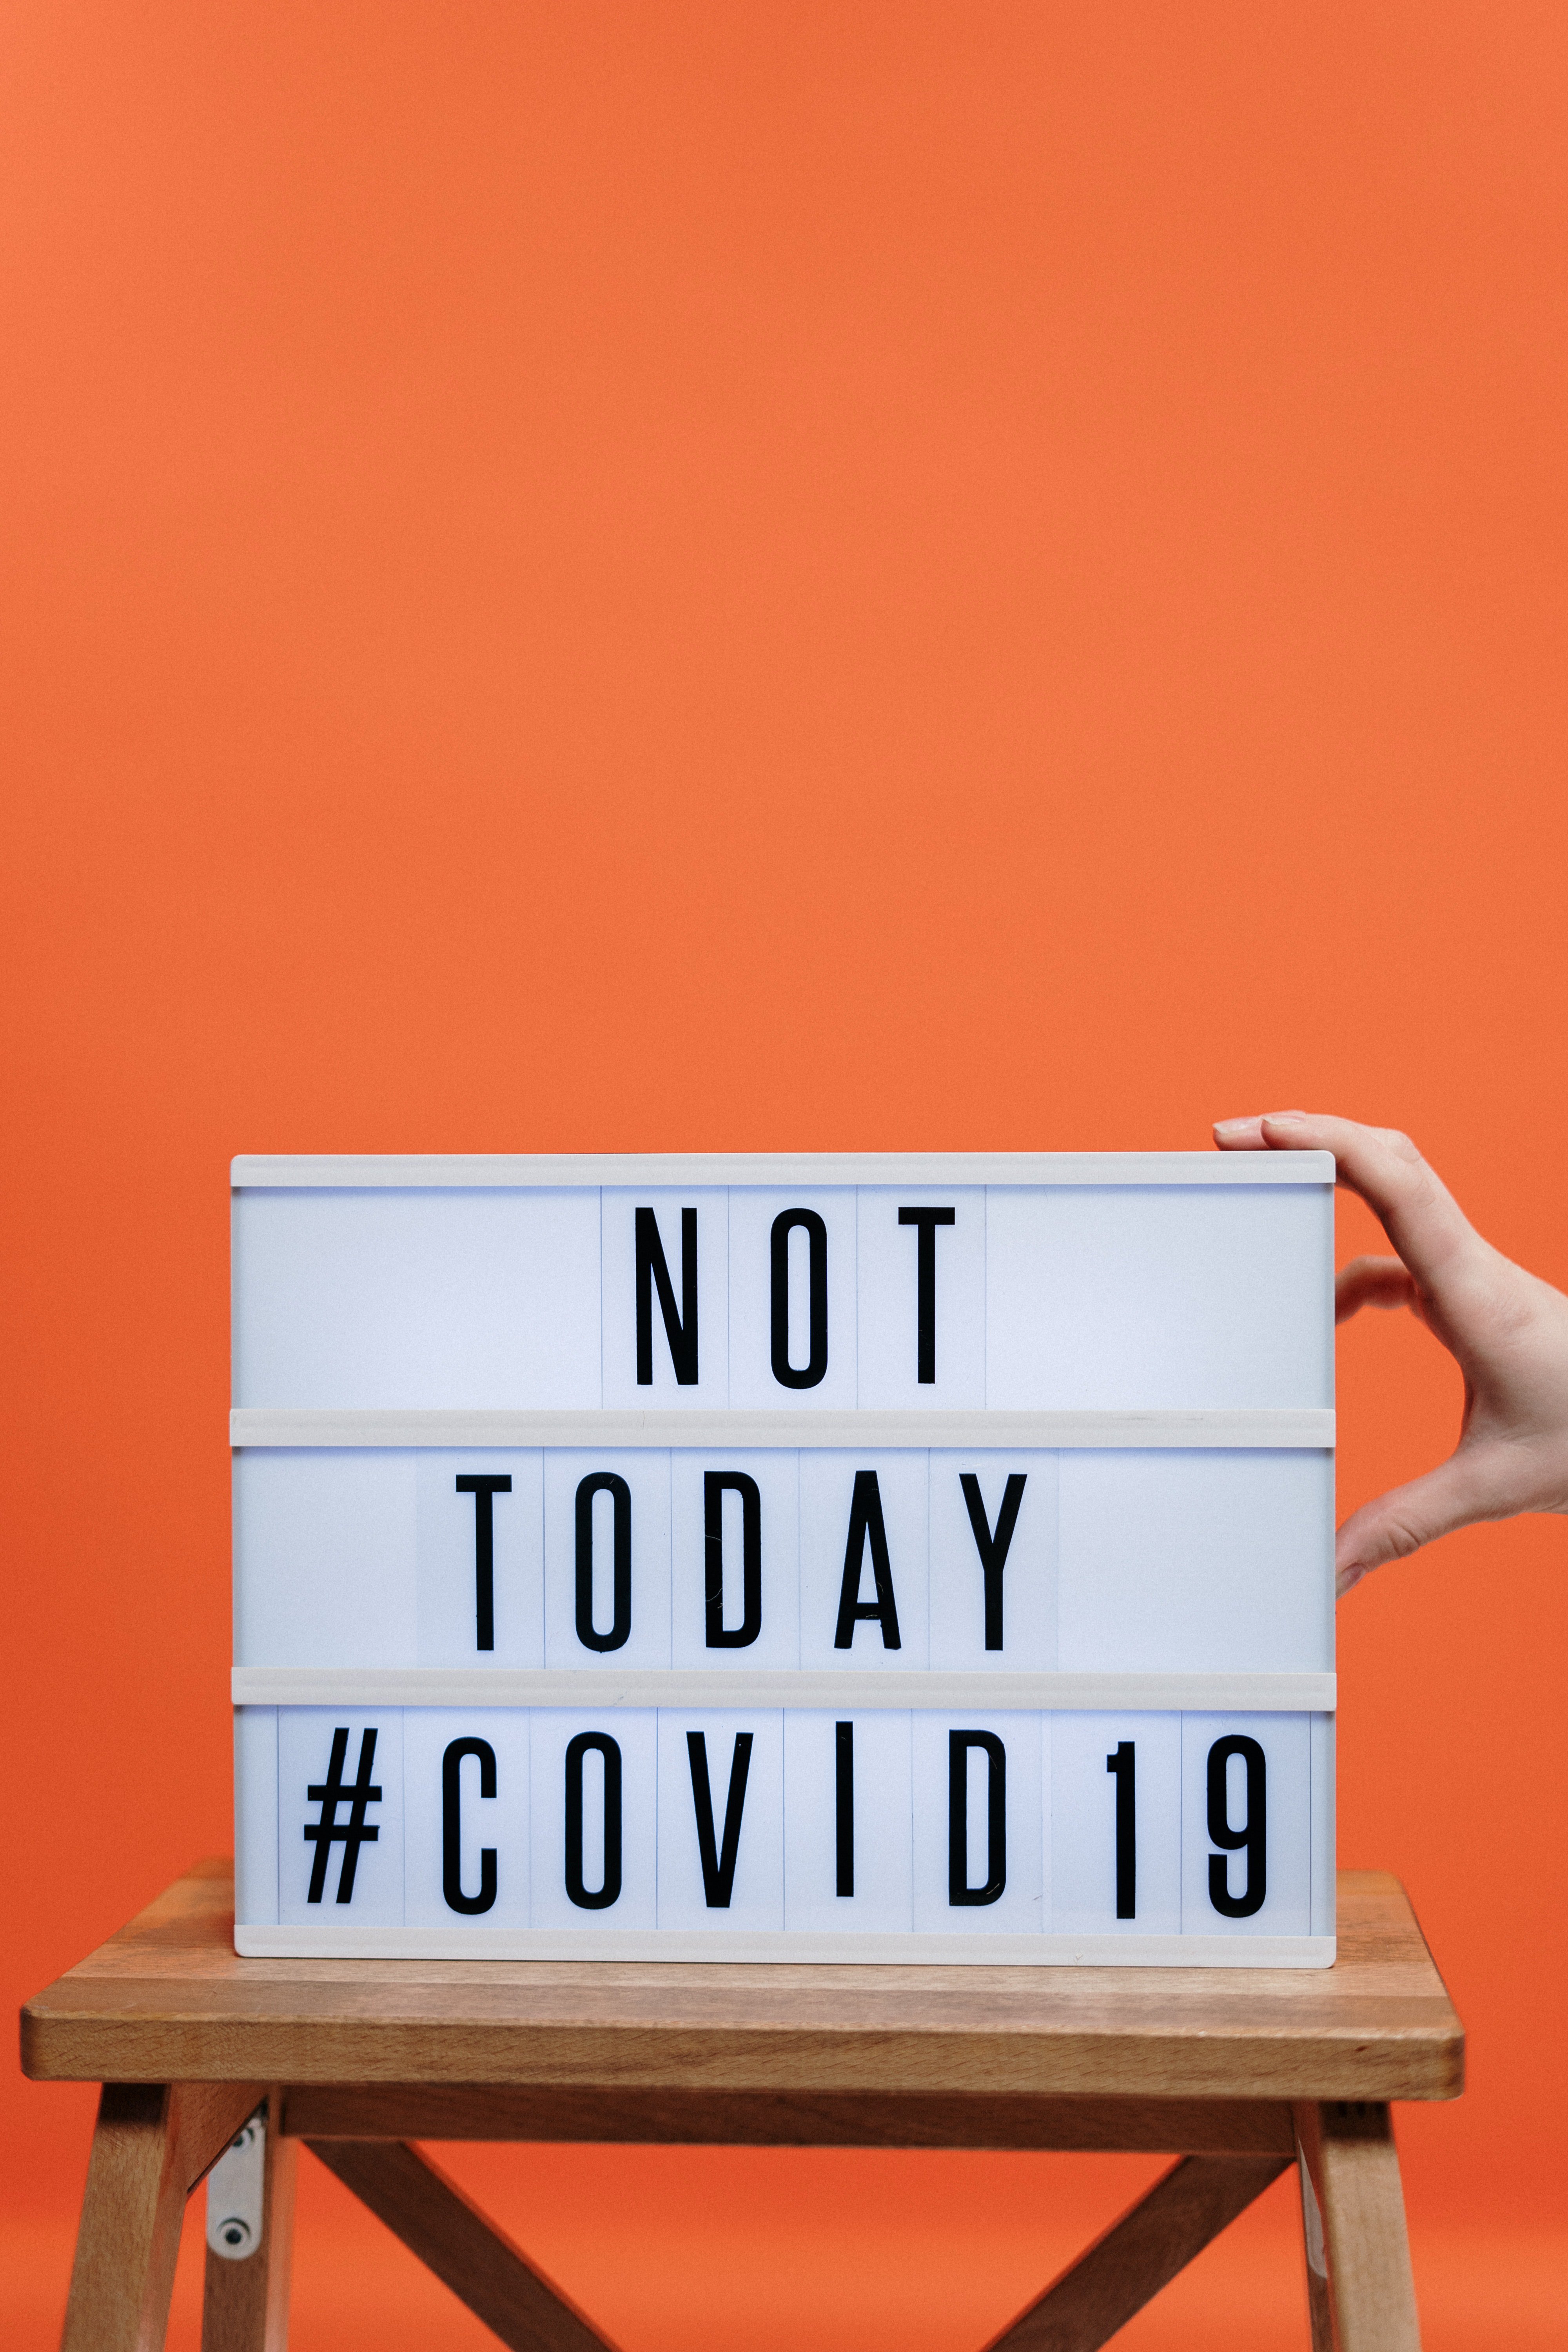 image that says NOT TODAY #COVID19